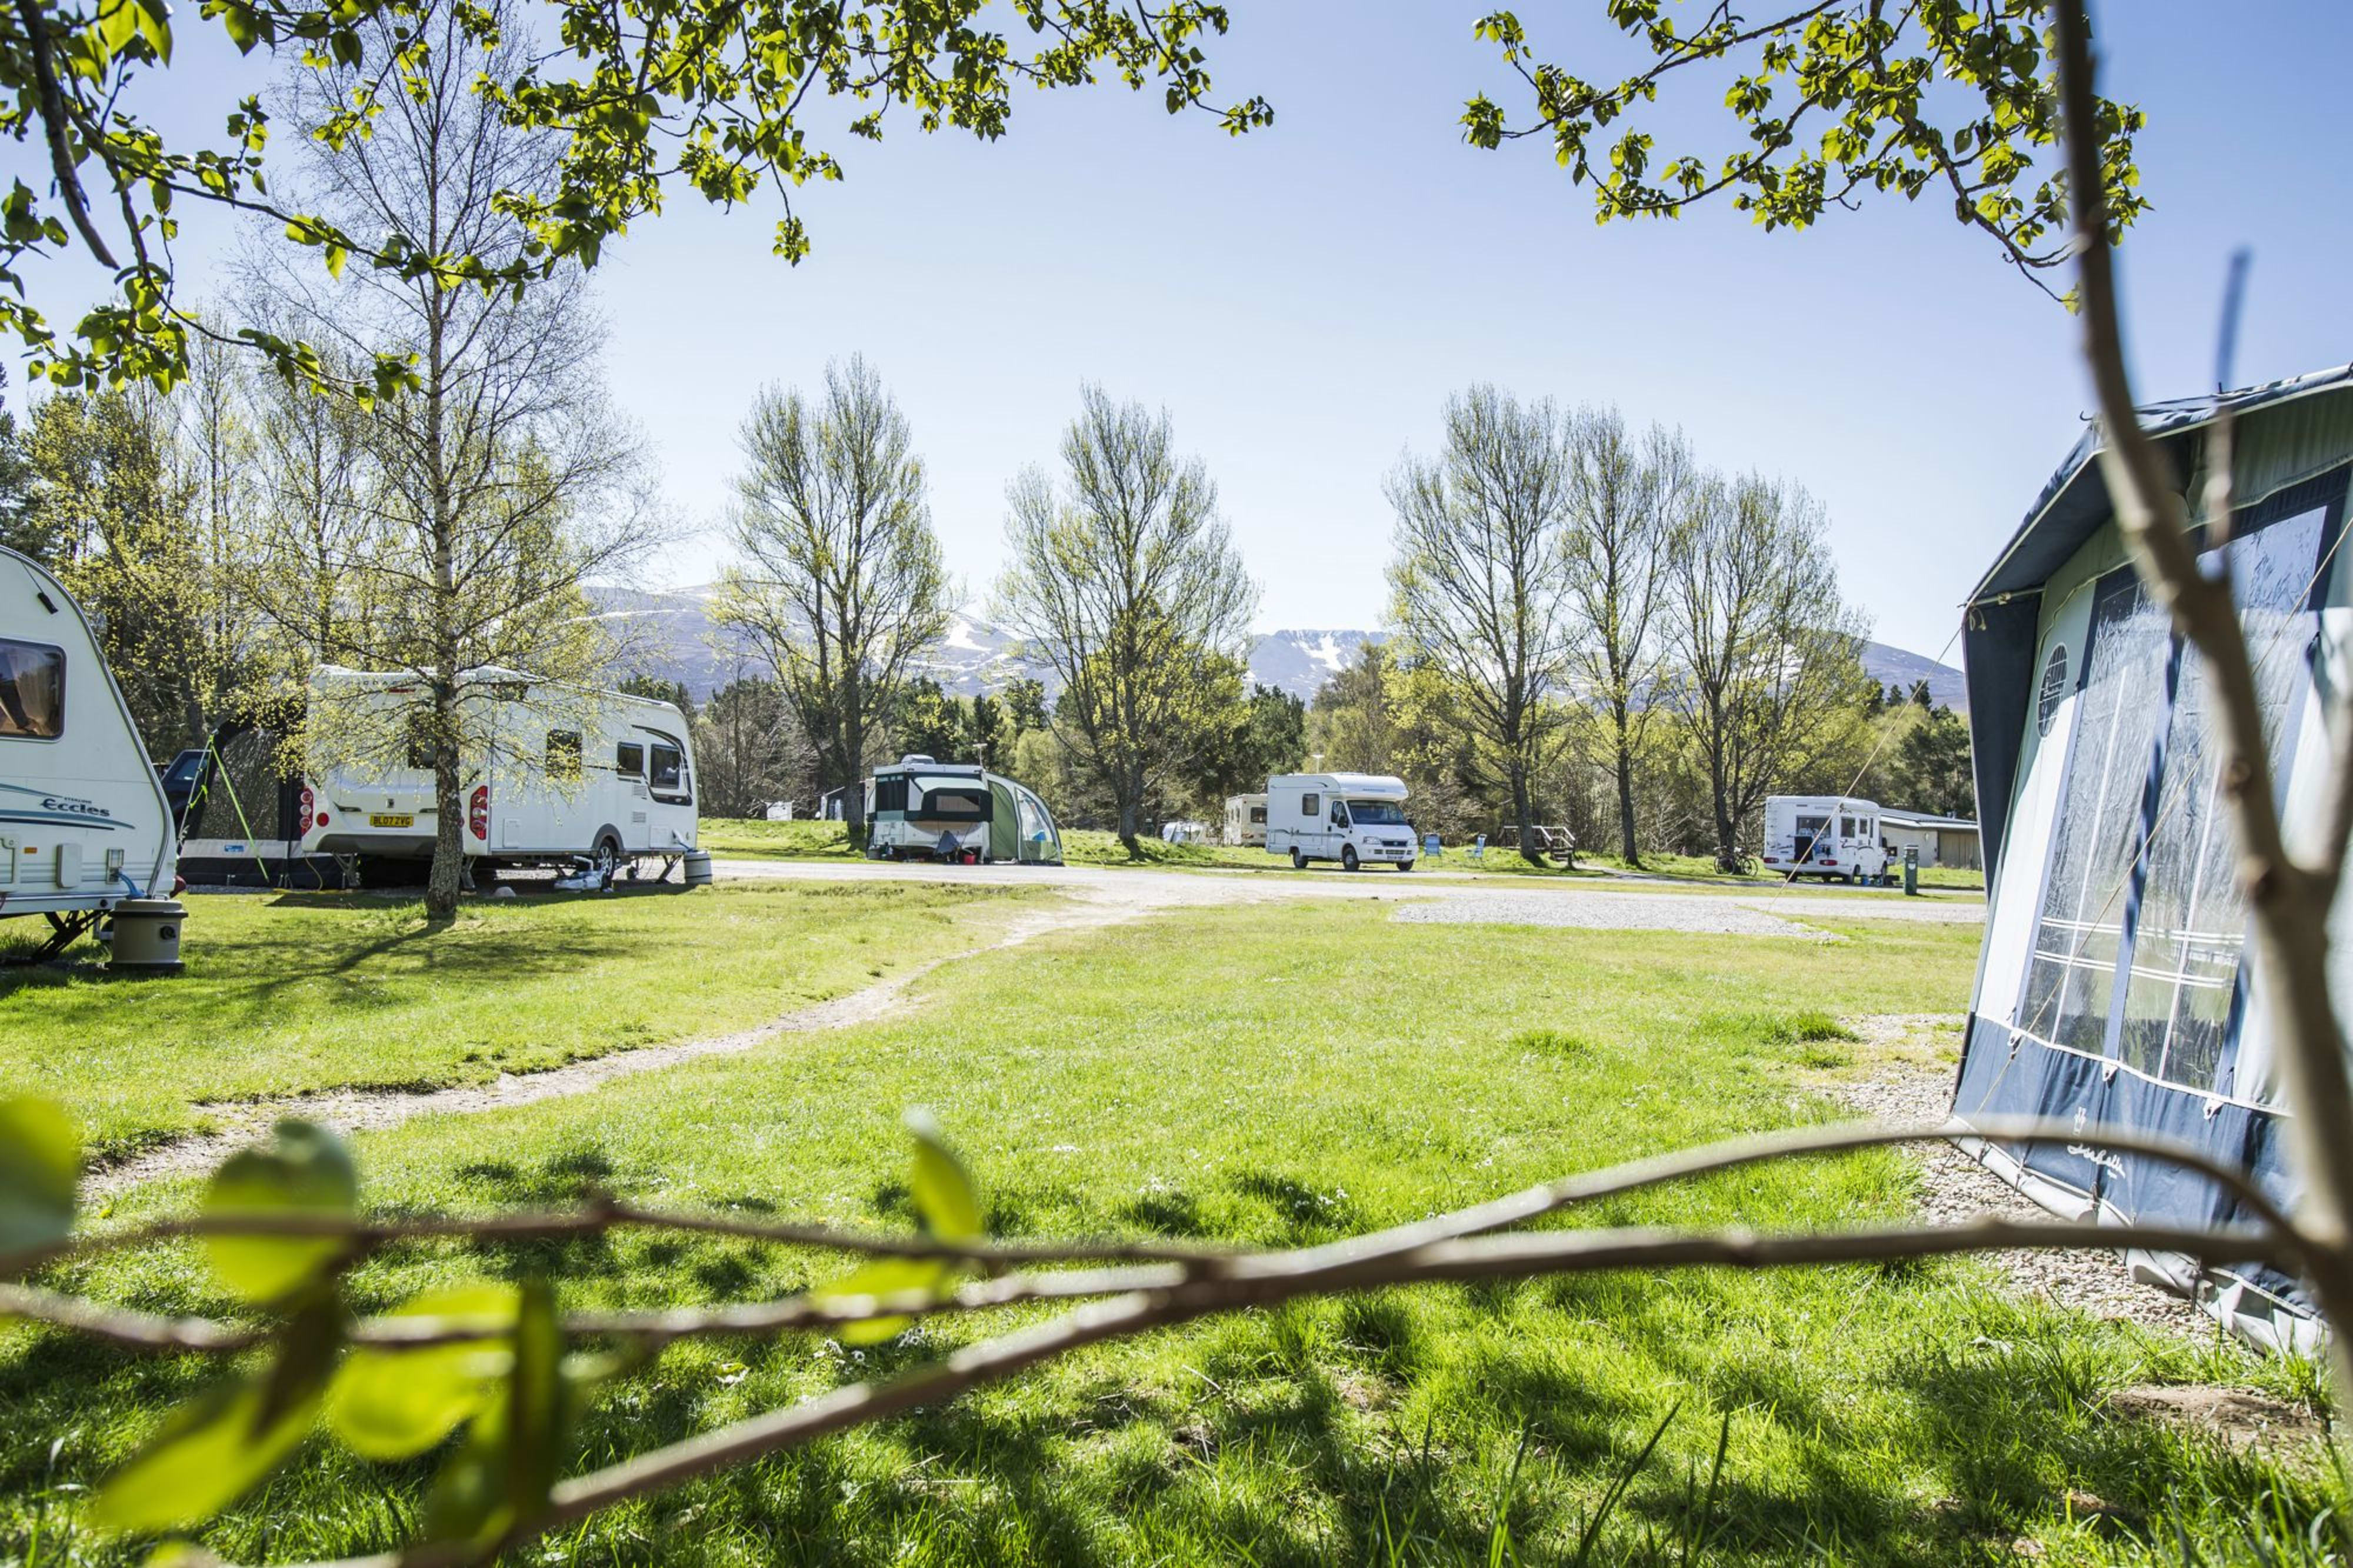 Offering camping in the UK: How long should I open my campsite for?